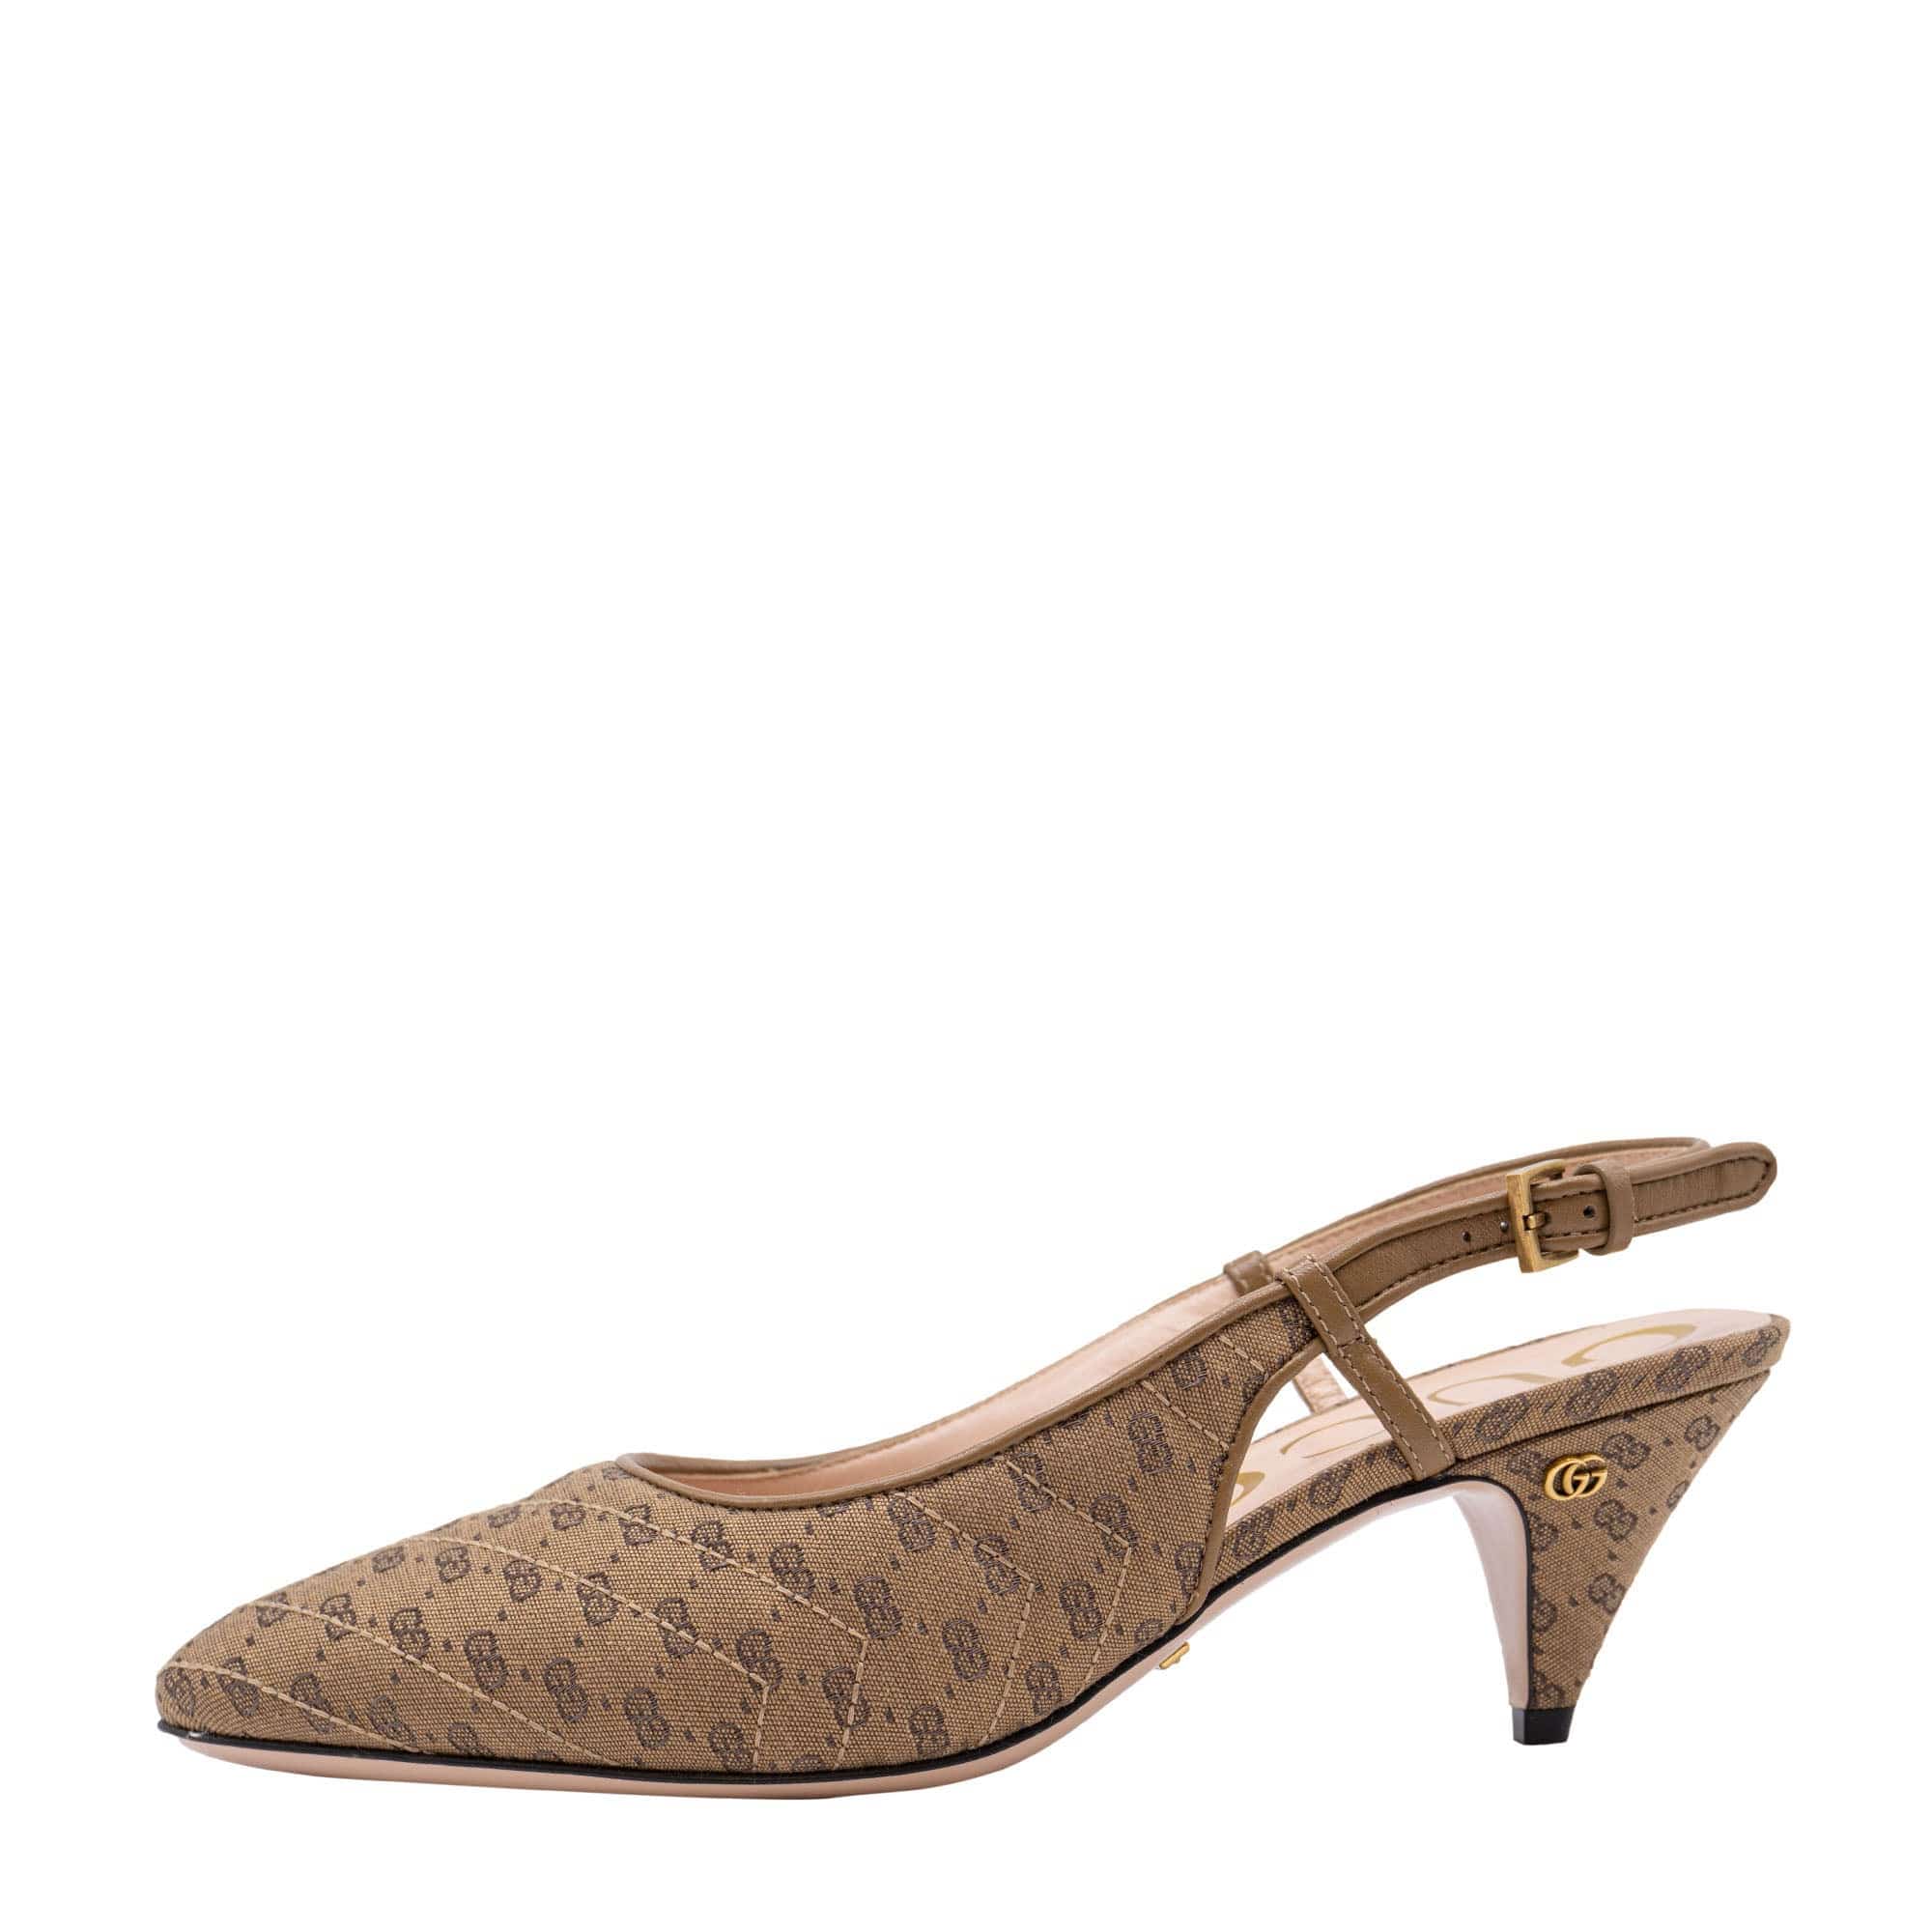 Gucci Brown GG Monogram Canvas Slingback Pumps 36.5 SYCH080